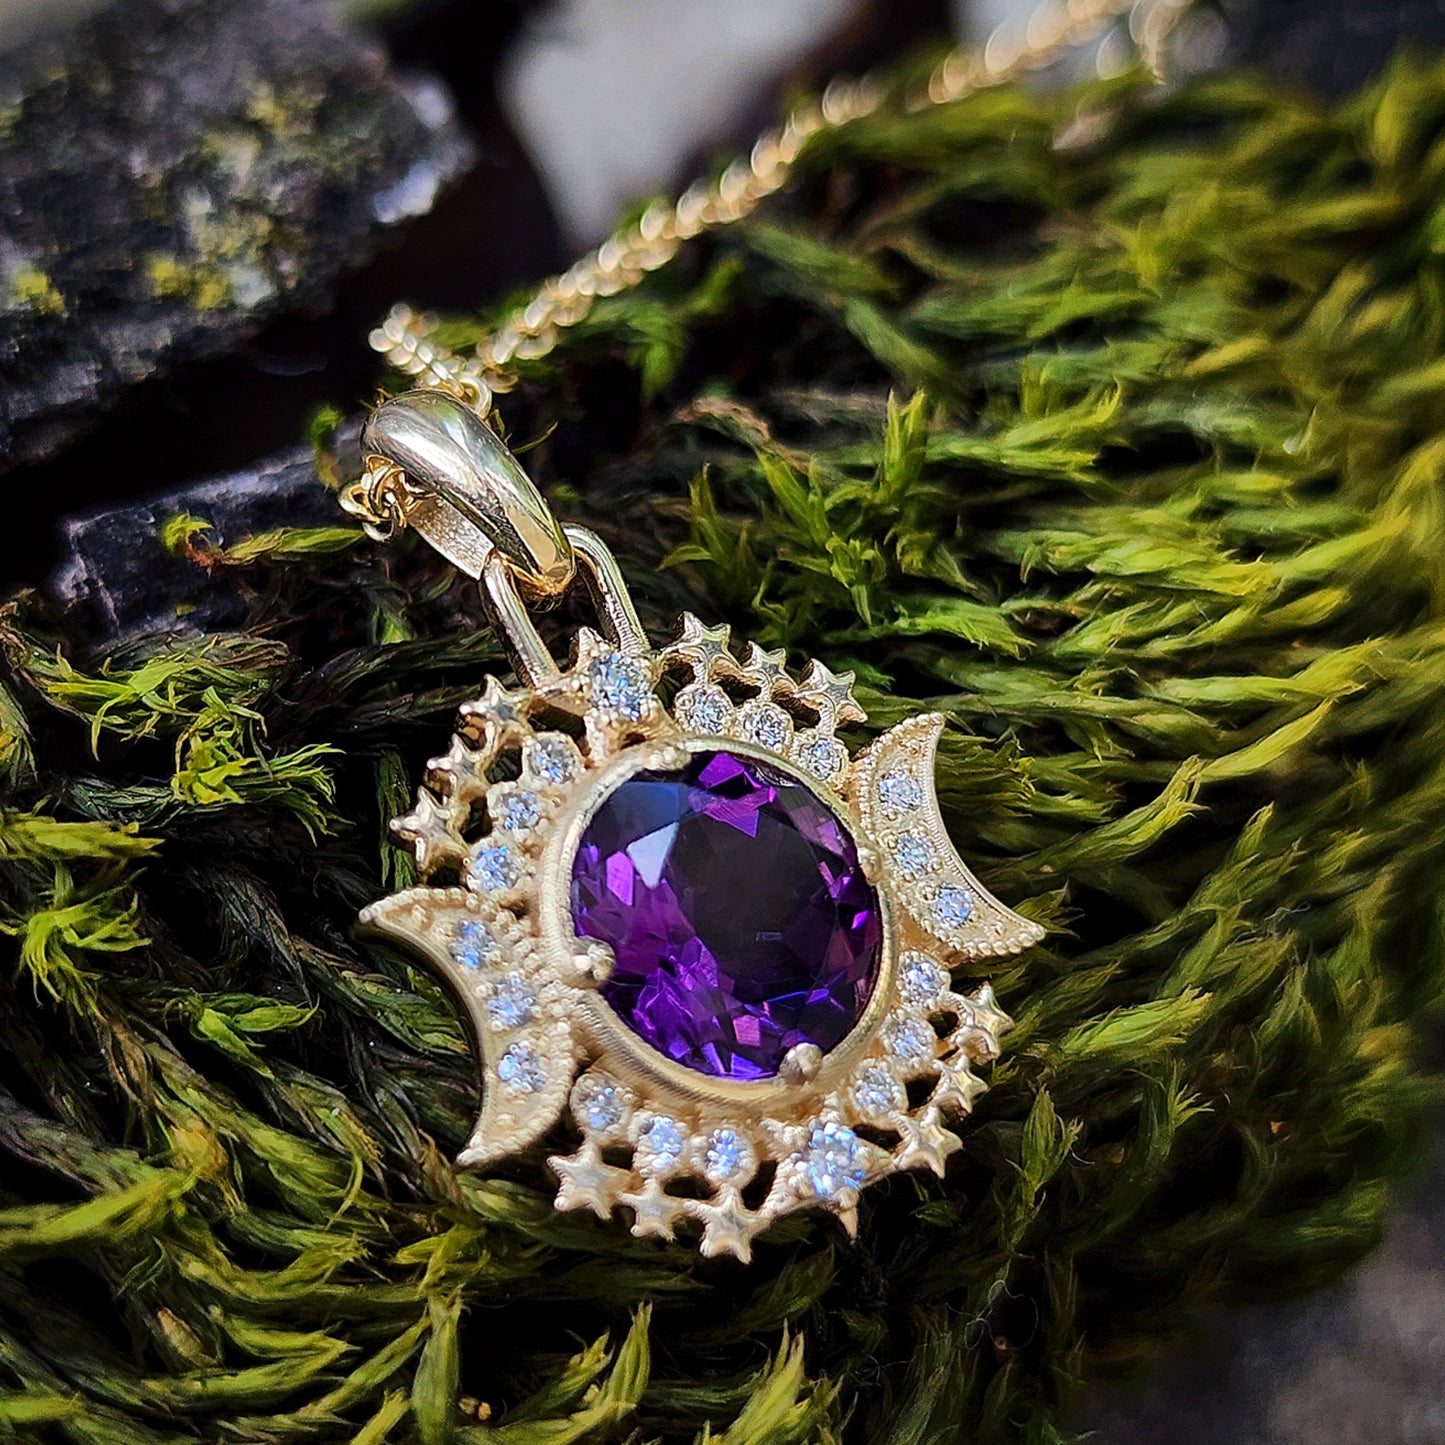 Round Amethyst Pendant with Moon & Stars Diamond Halo, Celestial Delicate Fine Jewelry 14k Gold Ethereal Handmade Necklace